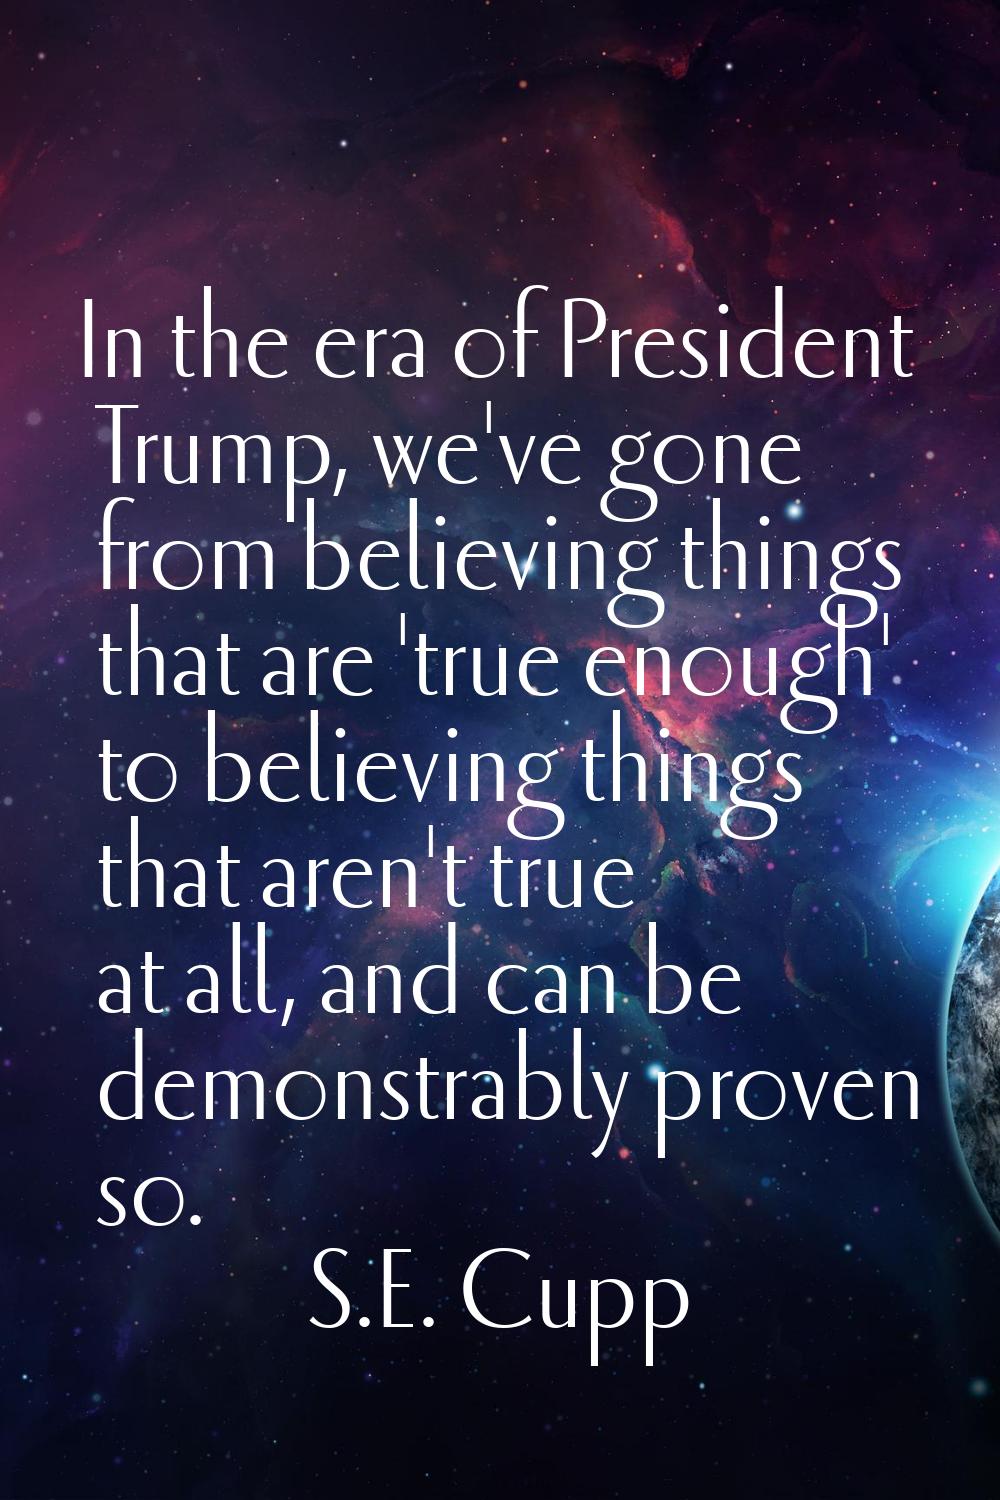 In the era of President Trump, we've gone from believing things that are 'true enough' to believing